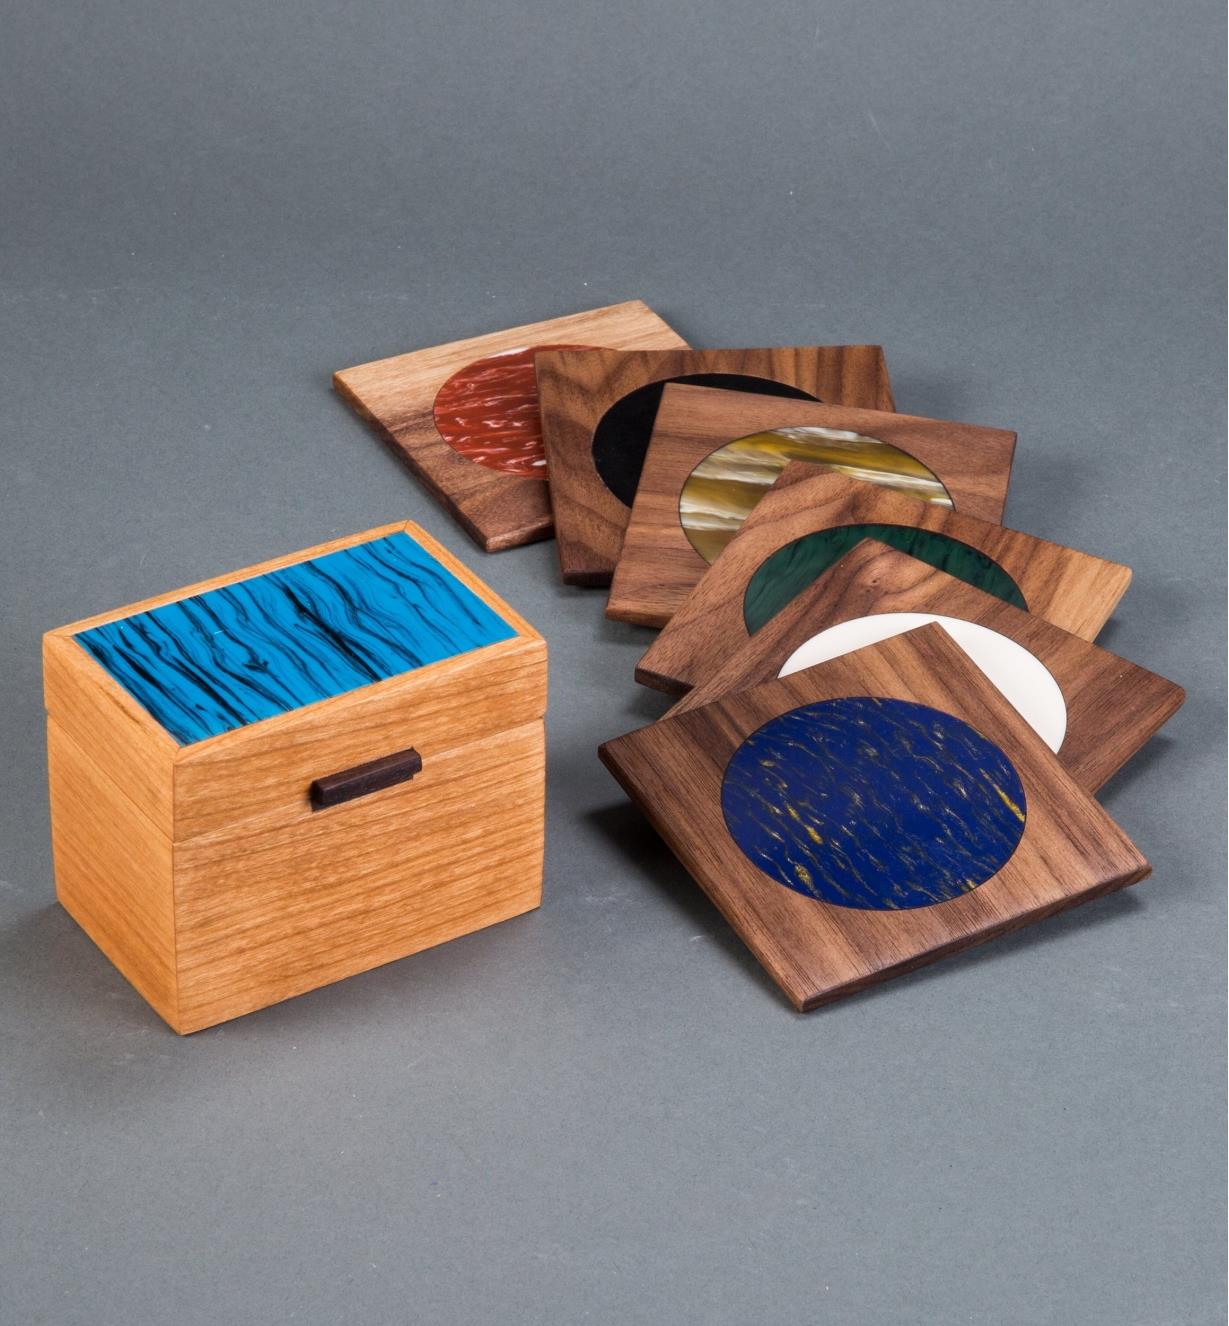 Examples of a box and coasters made with Simulated Natural Material Sheets